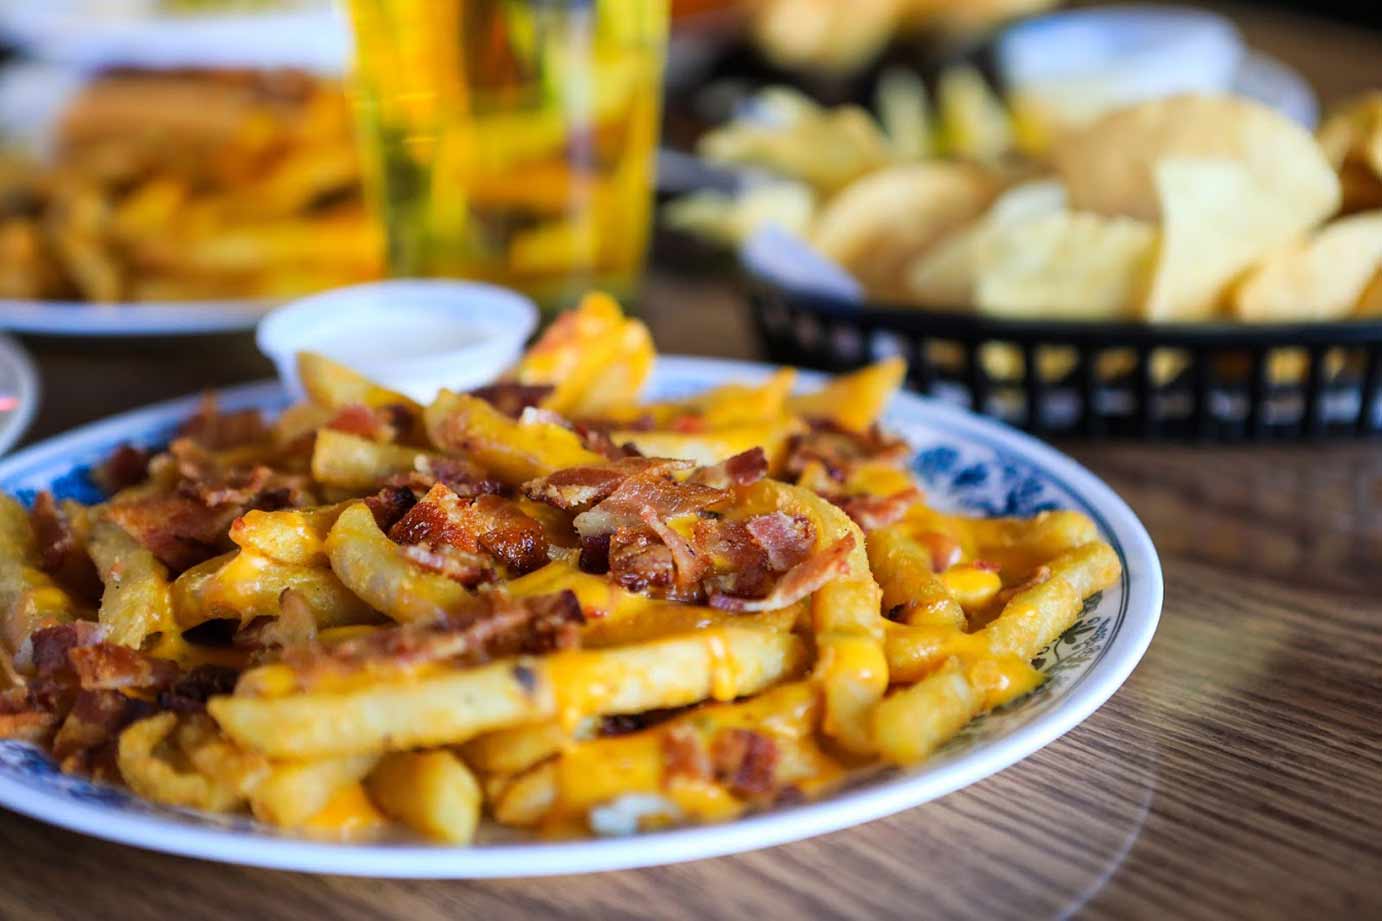 French fries with bacon and cheese